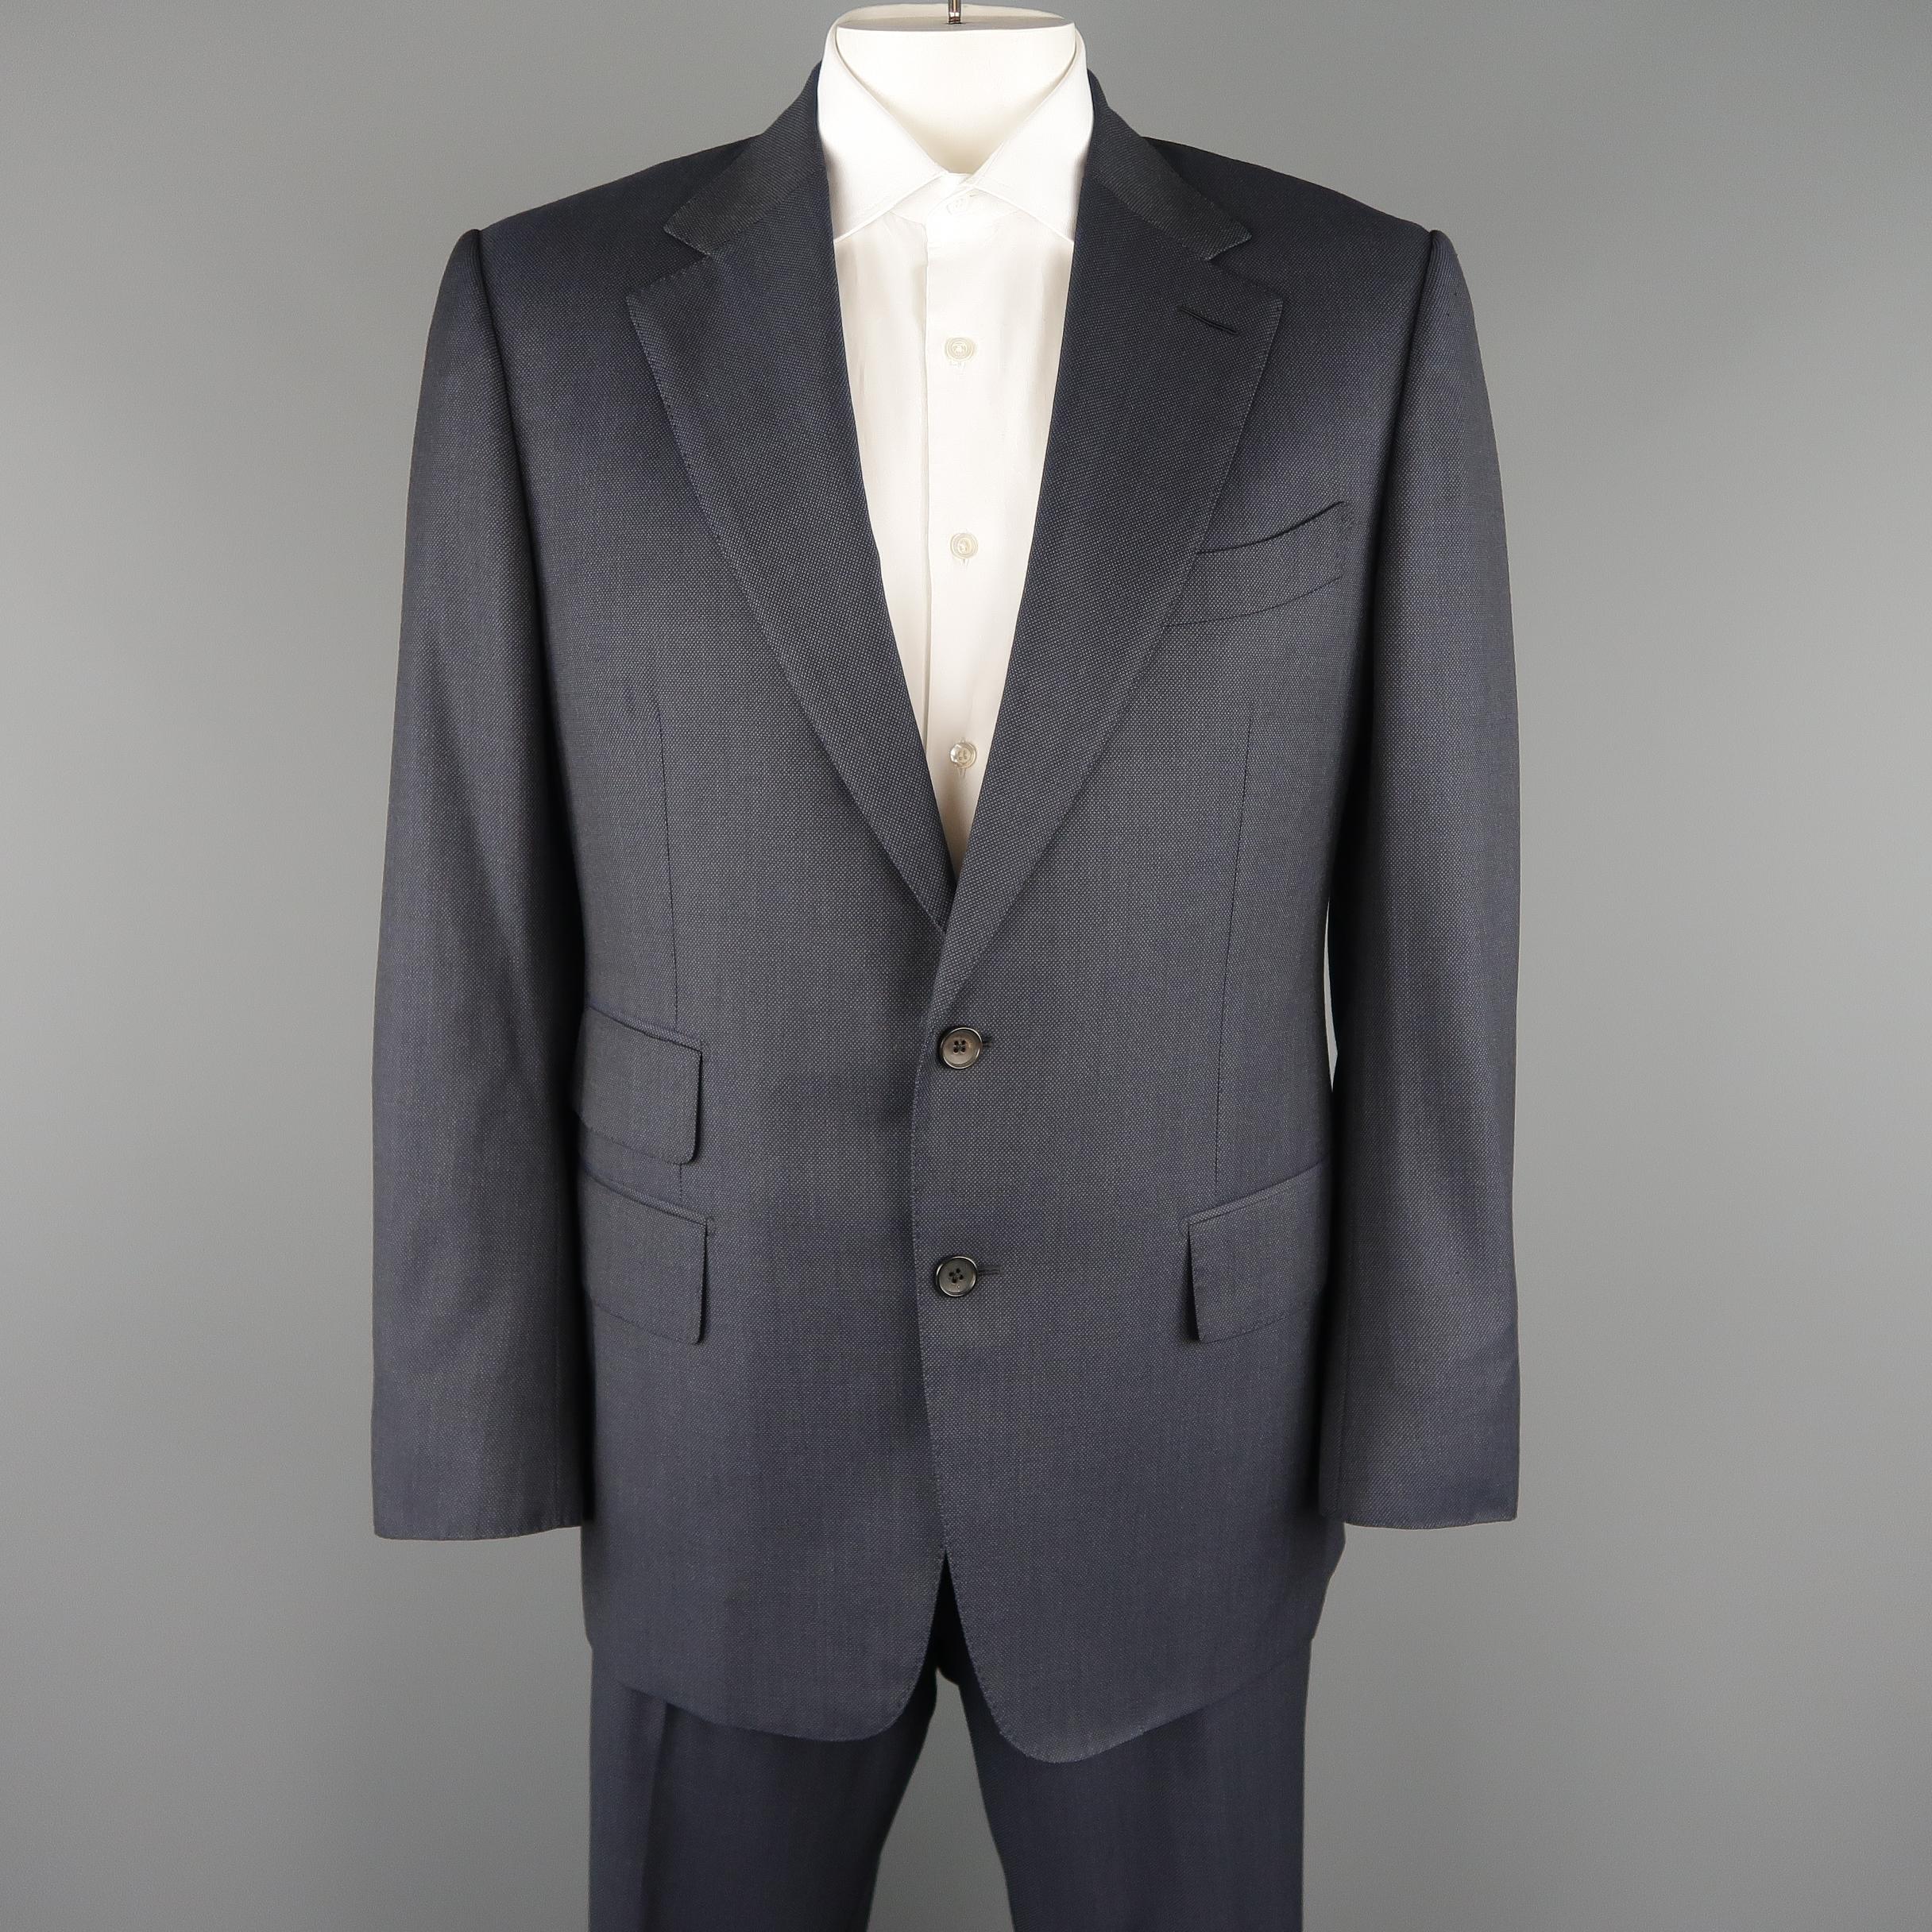 TOM FORD suit comes in woven navy blue wool material and includes a single breasted, notch lapel, two button, silk lined sport coat with functional button cuffs and matching flat front trousers with signature side tabs. 

Made in Switzerland.